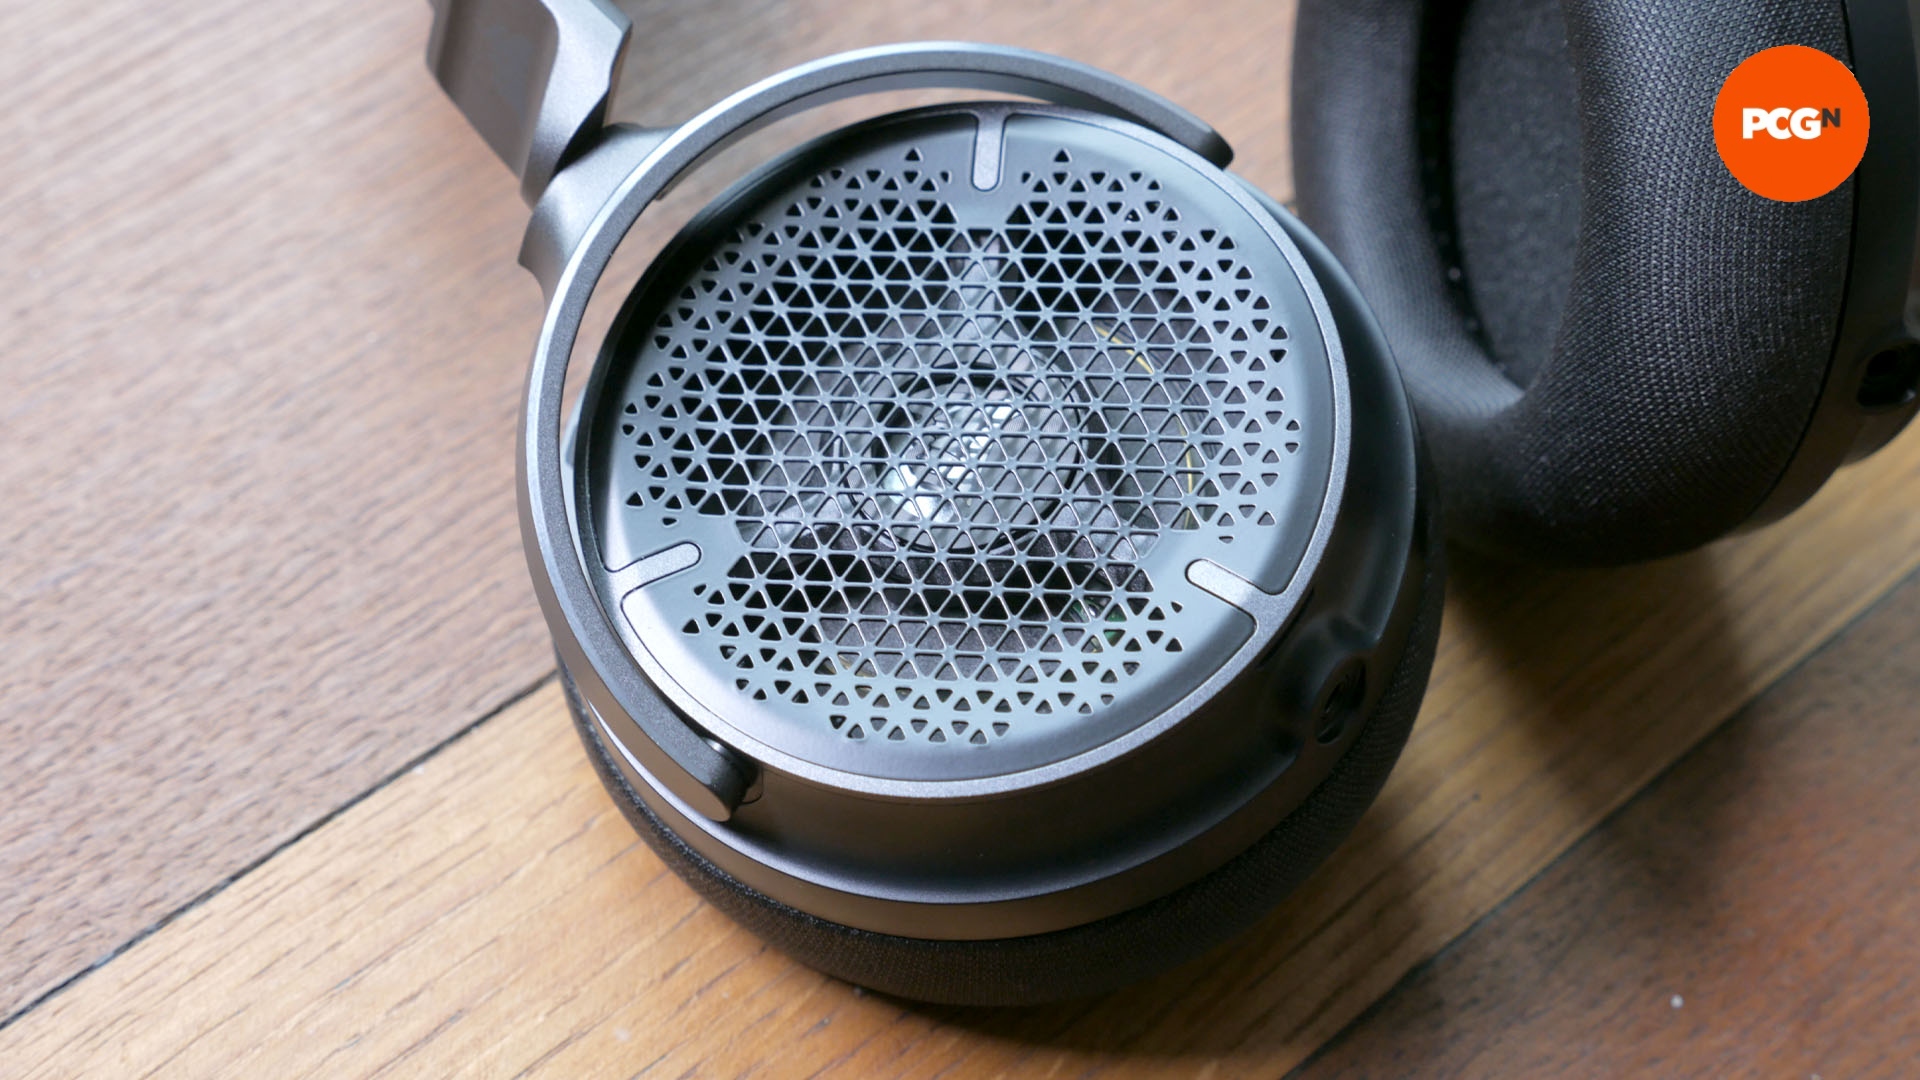 Corsair Virtuoso Pro review image showing the microphone in the earcup.